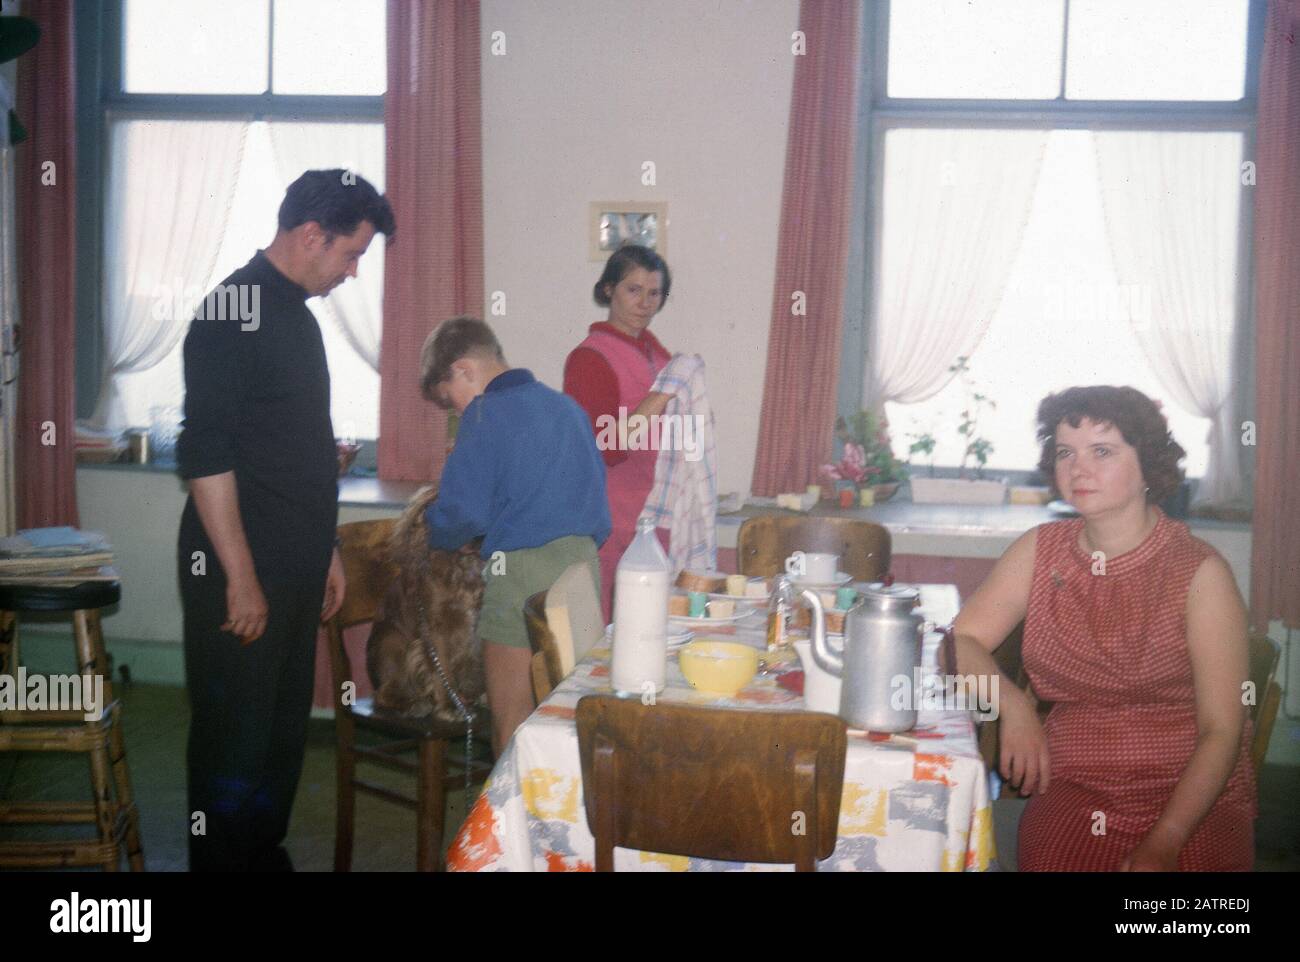 Vernacular photograph taken on a 35mm analog film transparency, believed to depict man in black vest standing beside woman in red and white stripe shirt during a meal at a youth hostel, 1970. Major topics/objects detected include People and Family. () Stock Photo